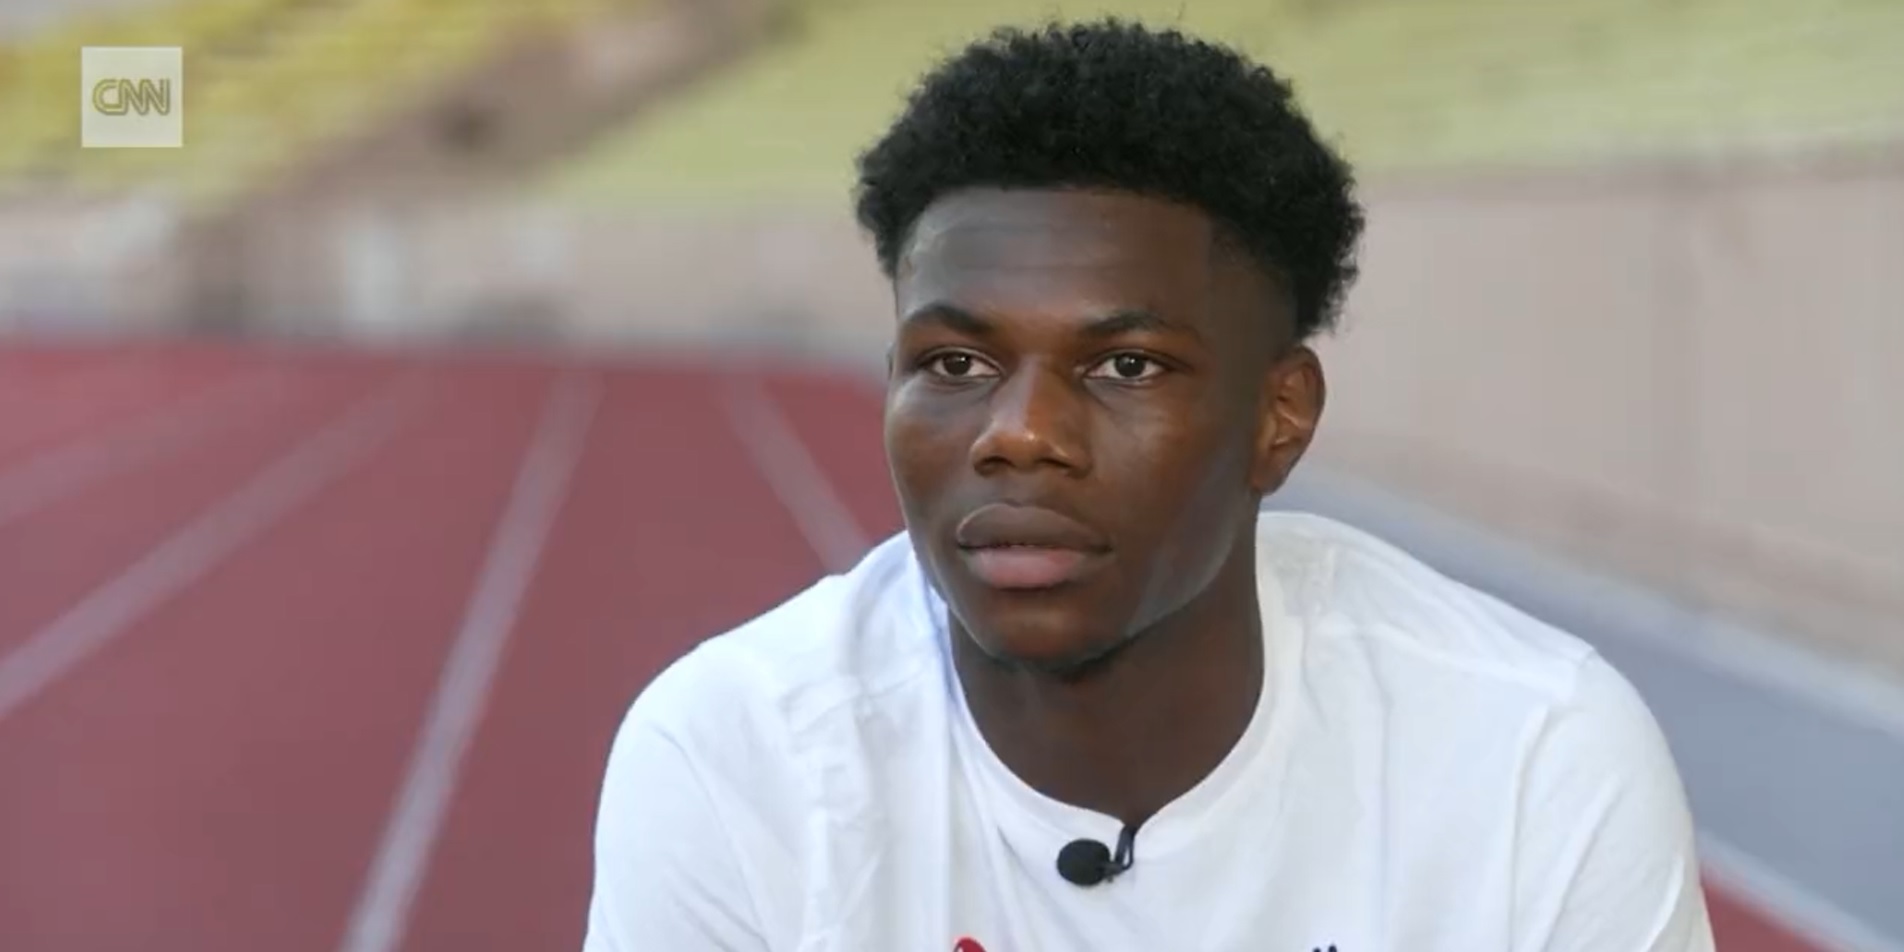 (Video) ‘I like both…’ – Tchouameni responds to transfer exit rumours as Liverpool links persist